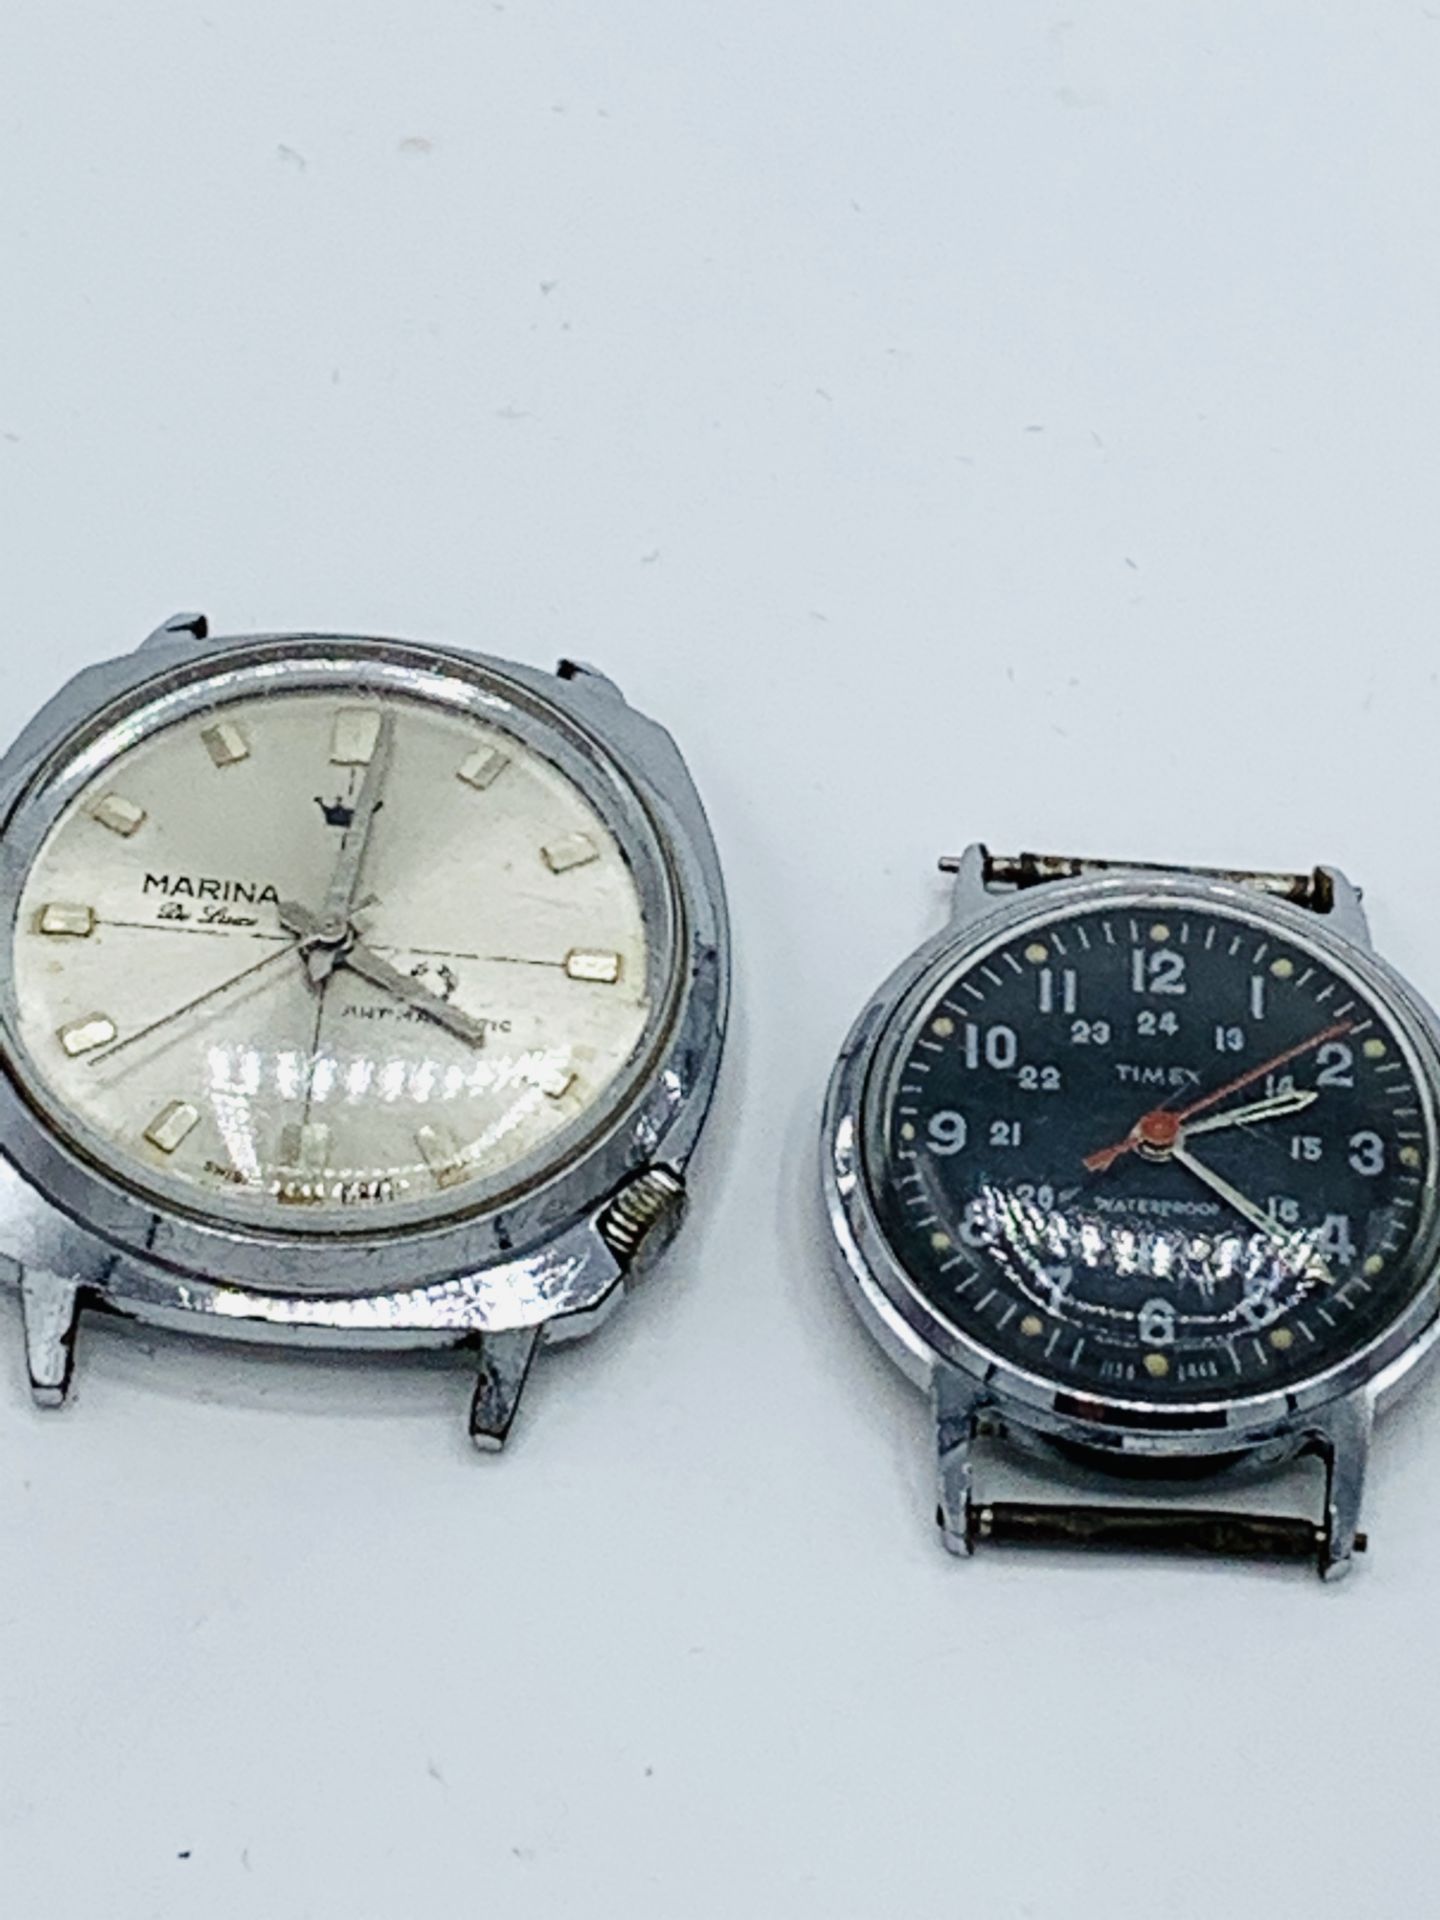 Marina De Luxe manual gent's wrist watch, no strap, going; Liban automatic wrist watch, and 2 others - Image 3 of 6